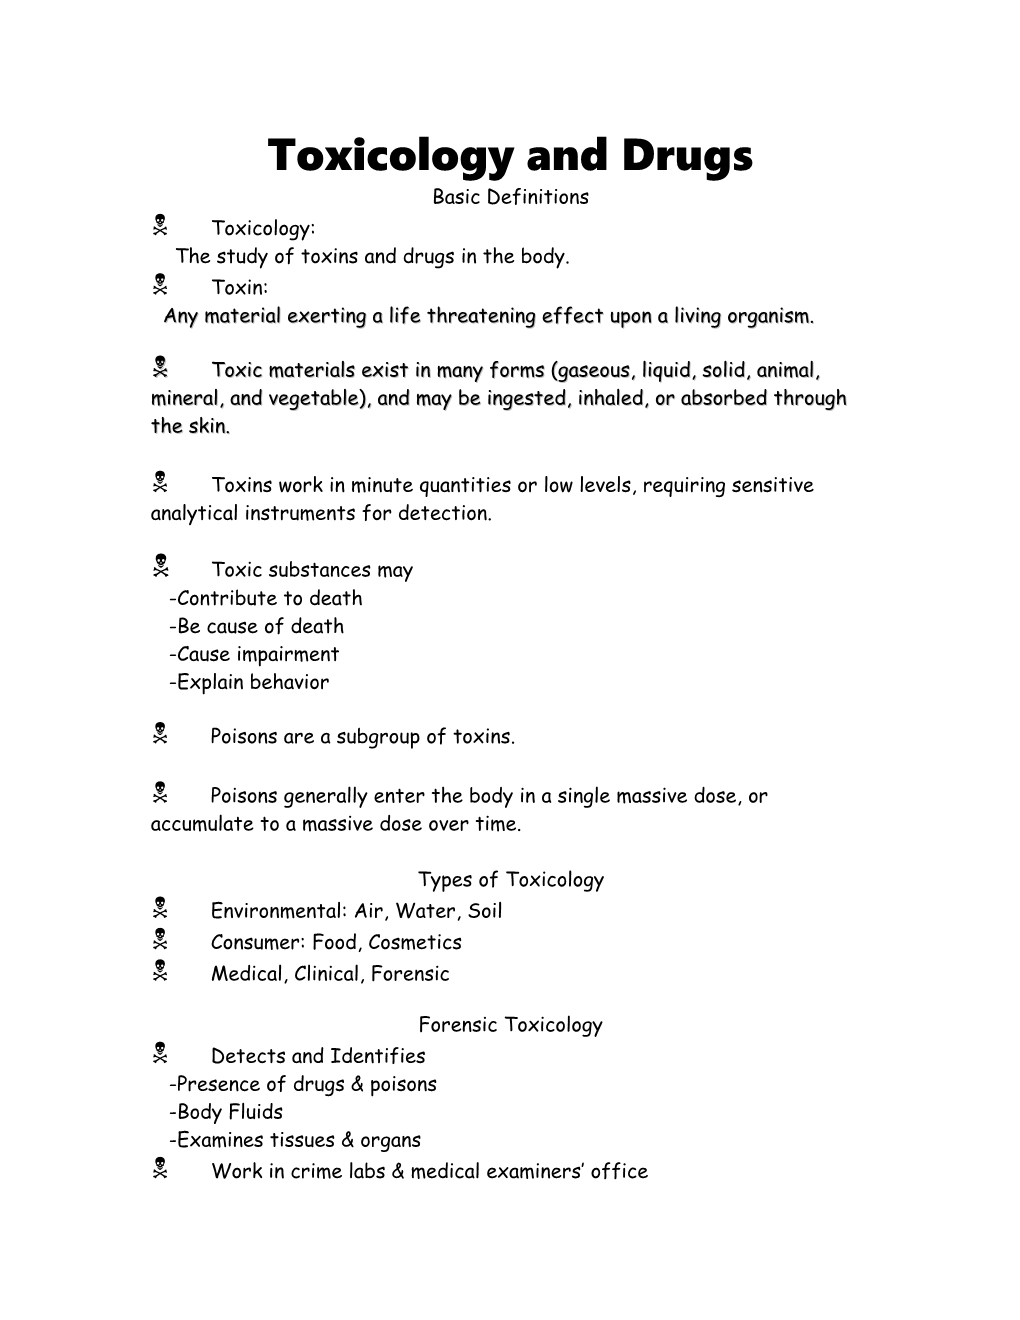 Toxicology and Drugs